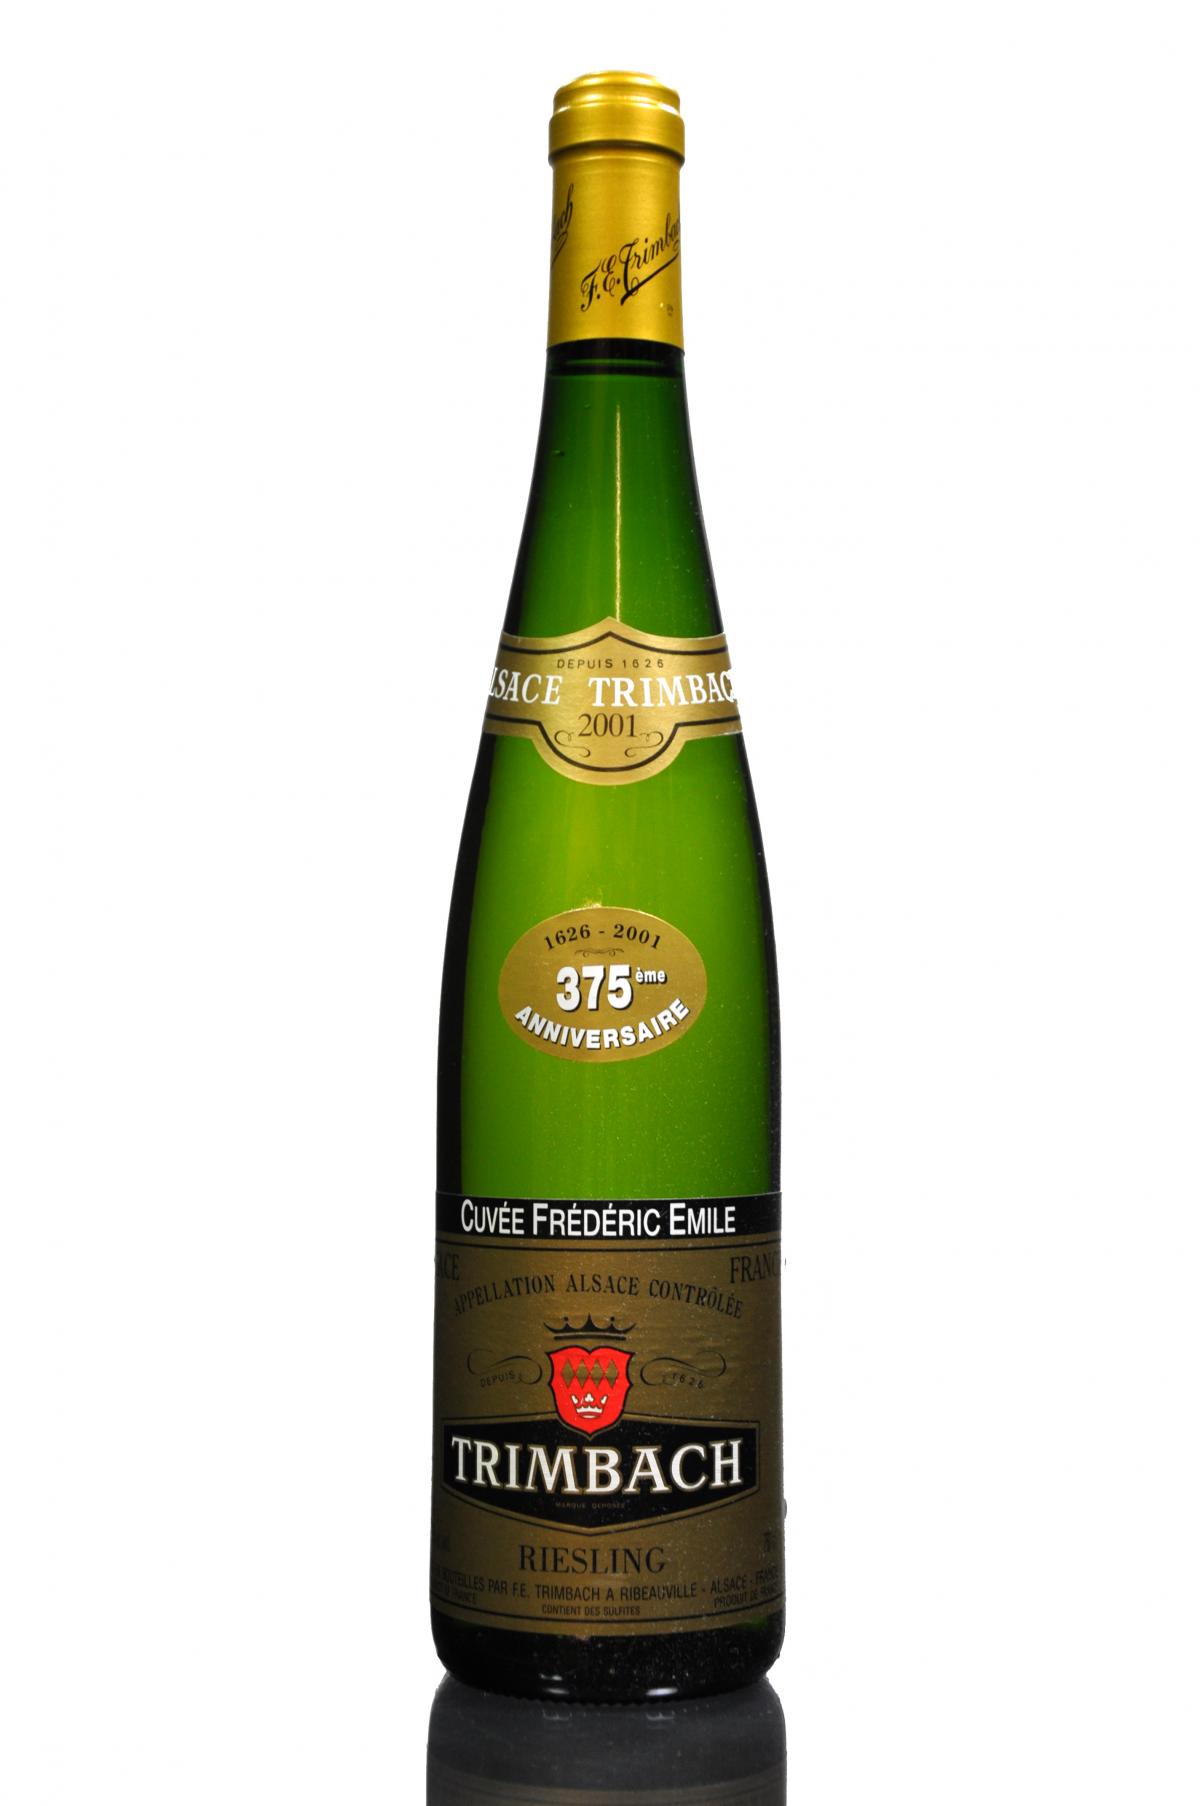 Trimbach Riesling 2001